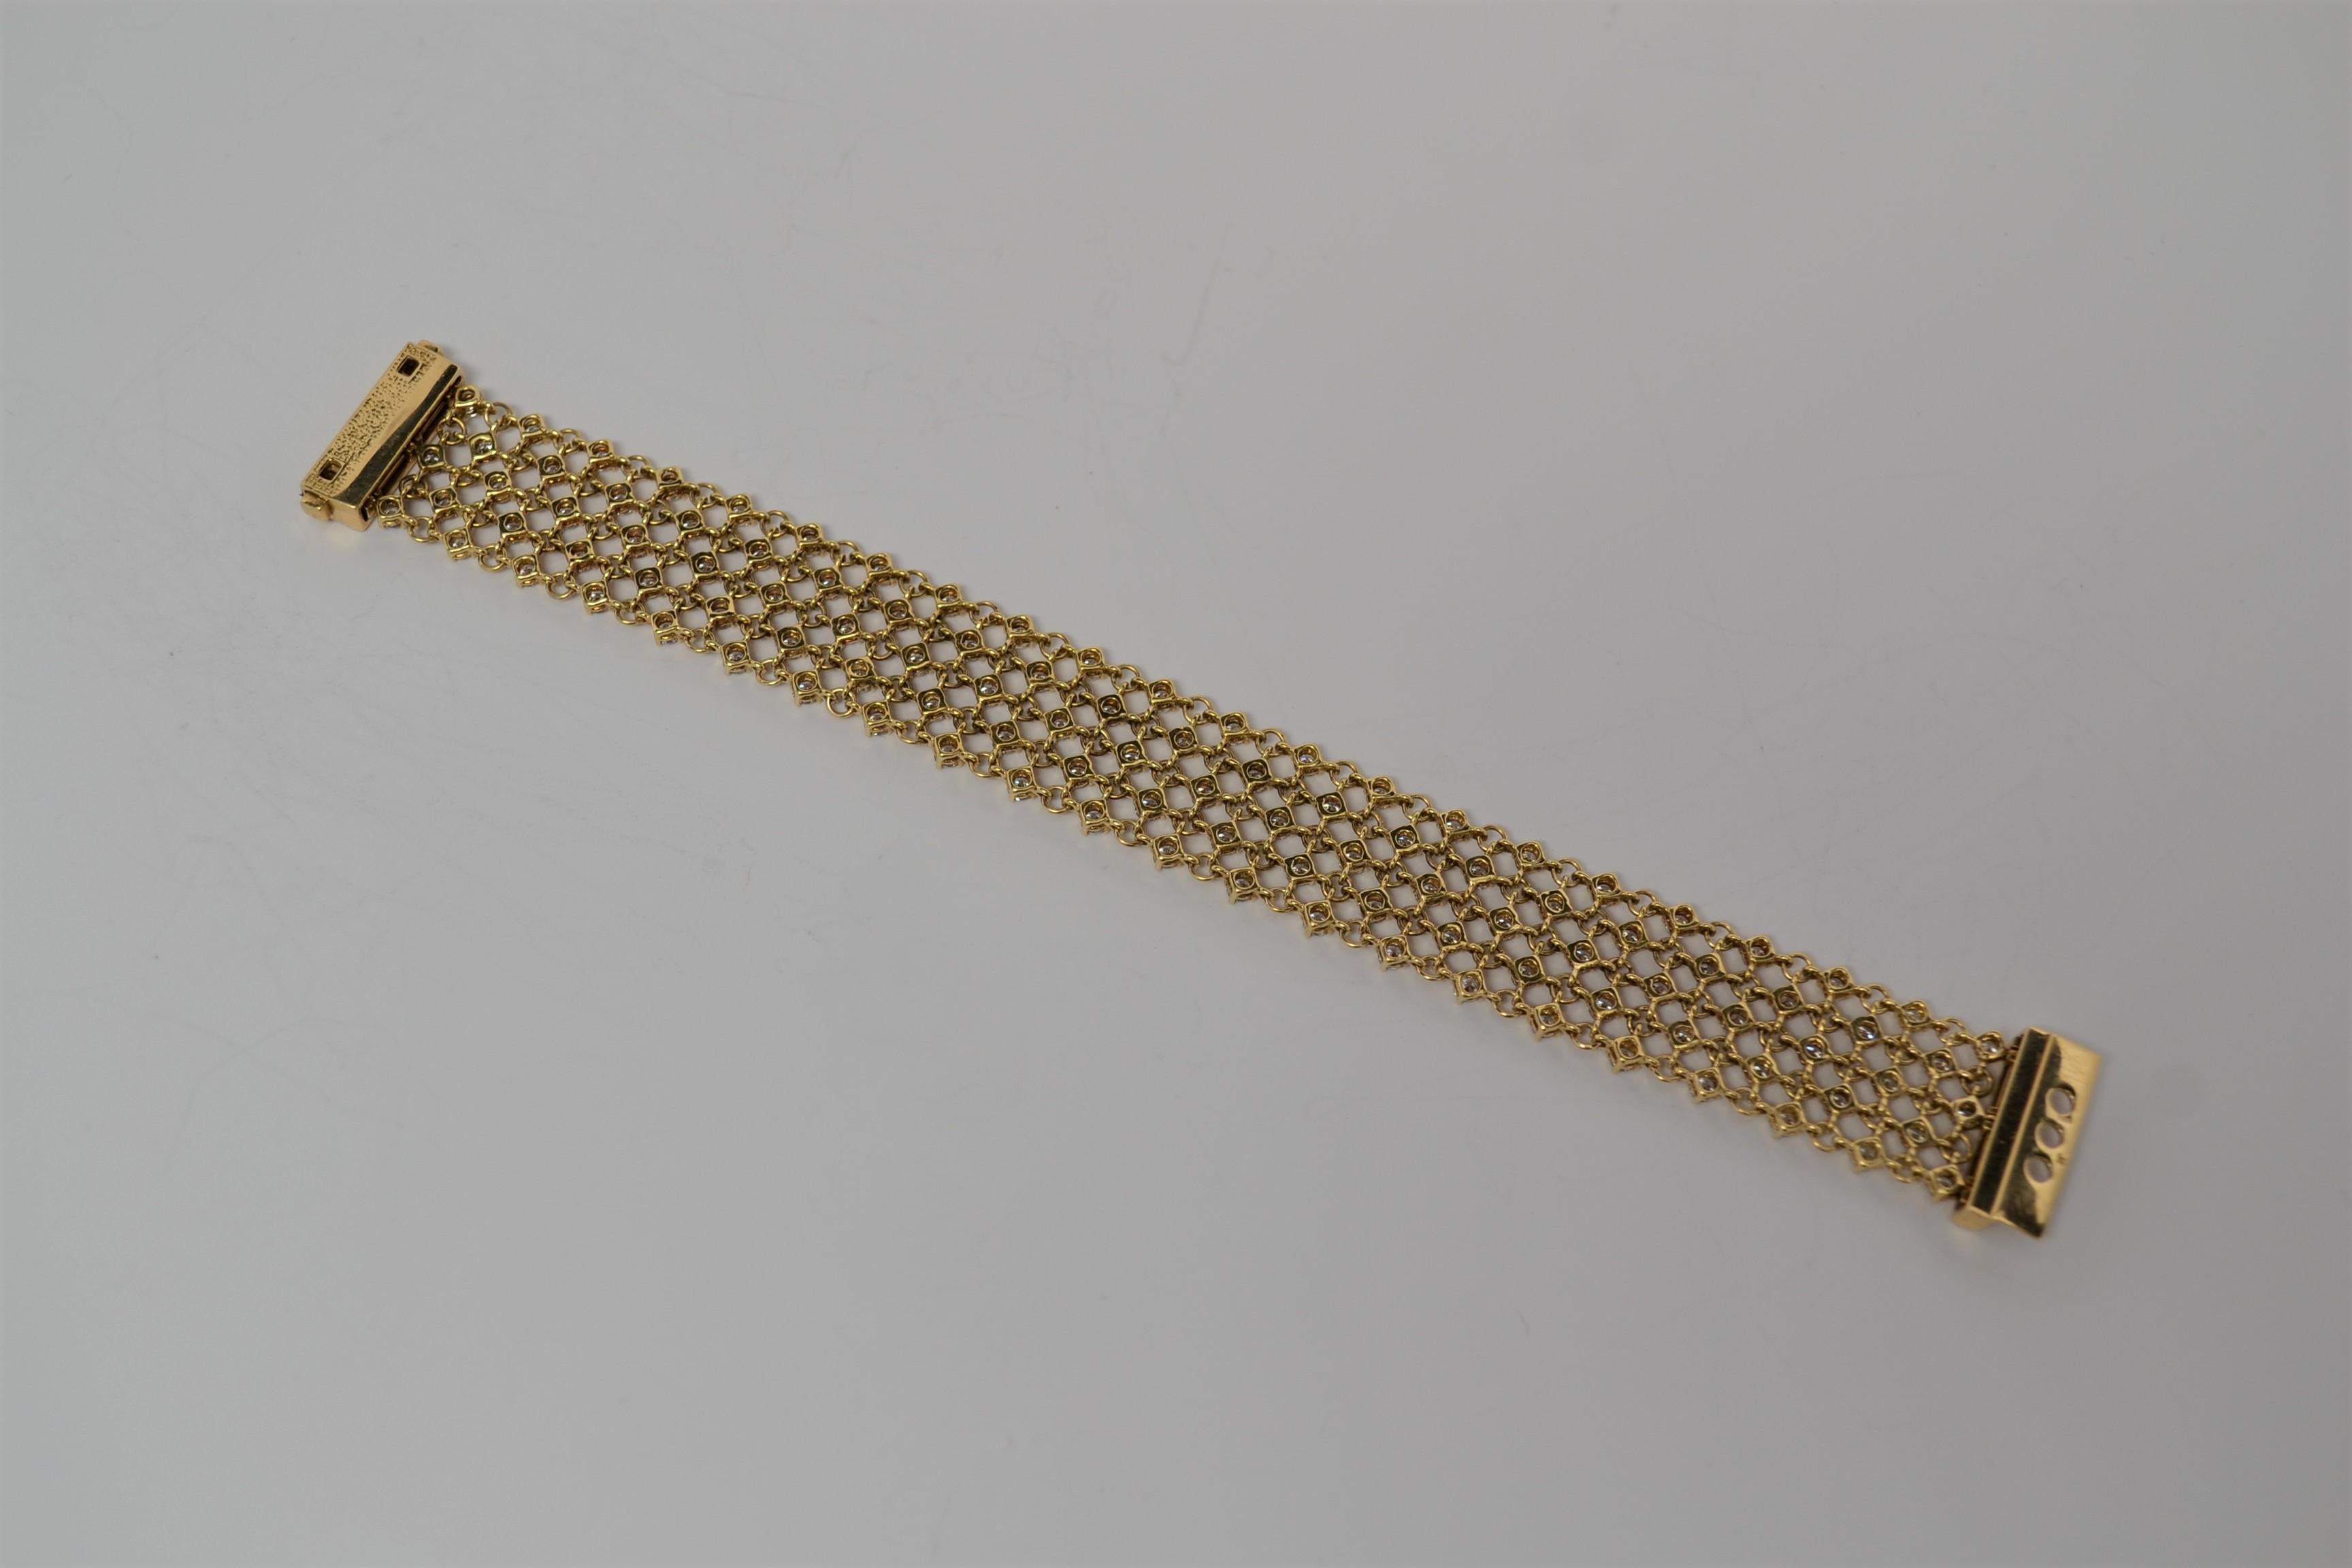 A finely made 18K Yellow Gold and Round Brilliant Cut Diamond Bracelet. The bracelet is a five row layout in a mesh format with round 18K Yellow Gold links and four prong Diamond baskets. Diamonds are also set in the proprietary open and closure